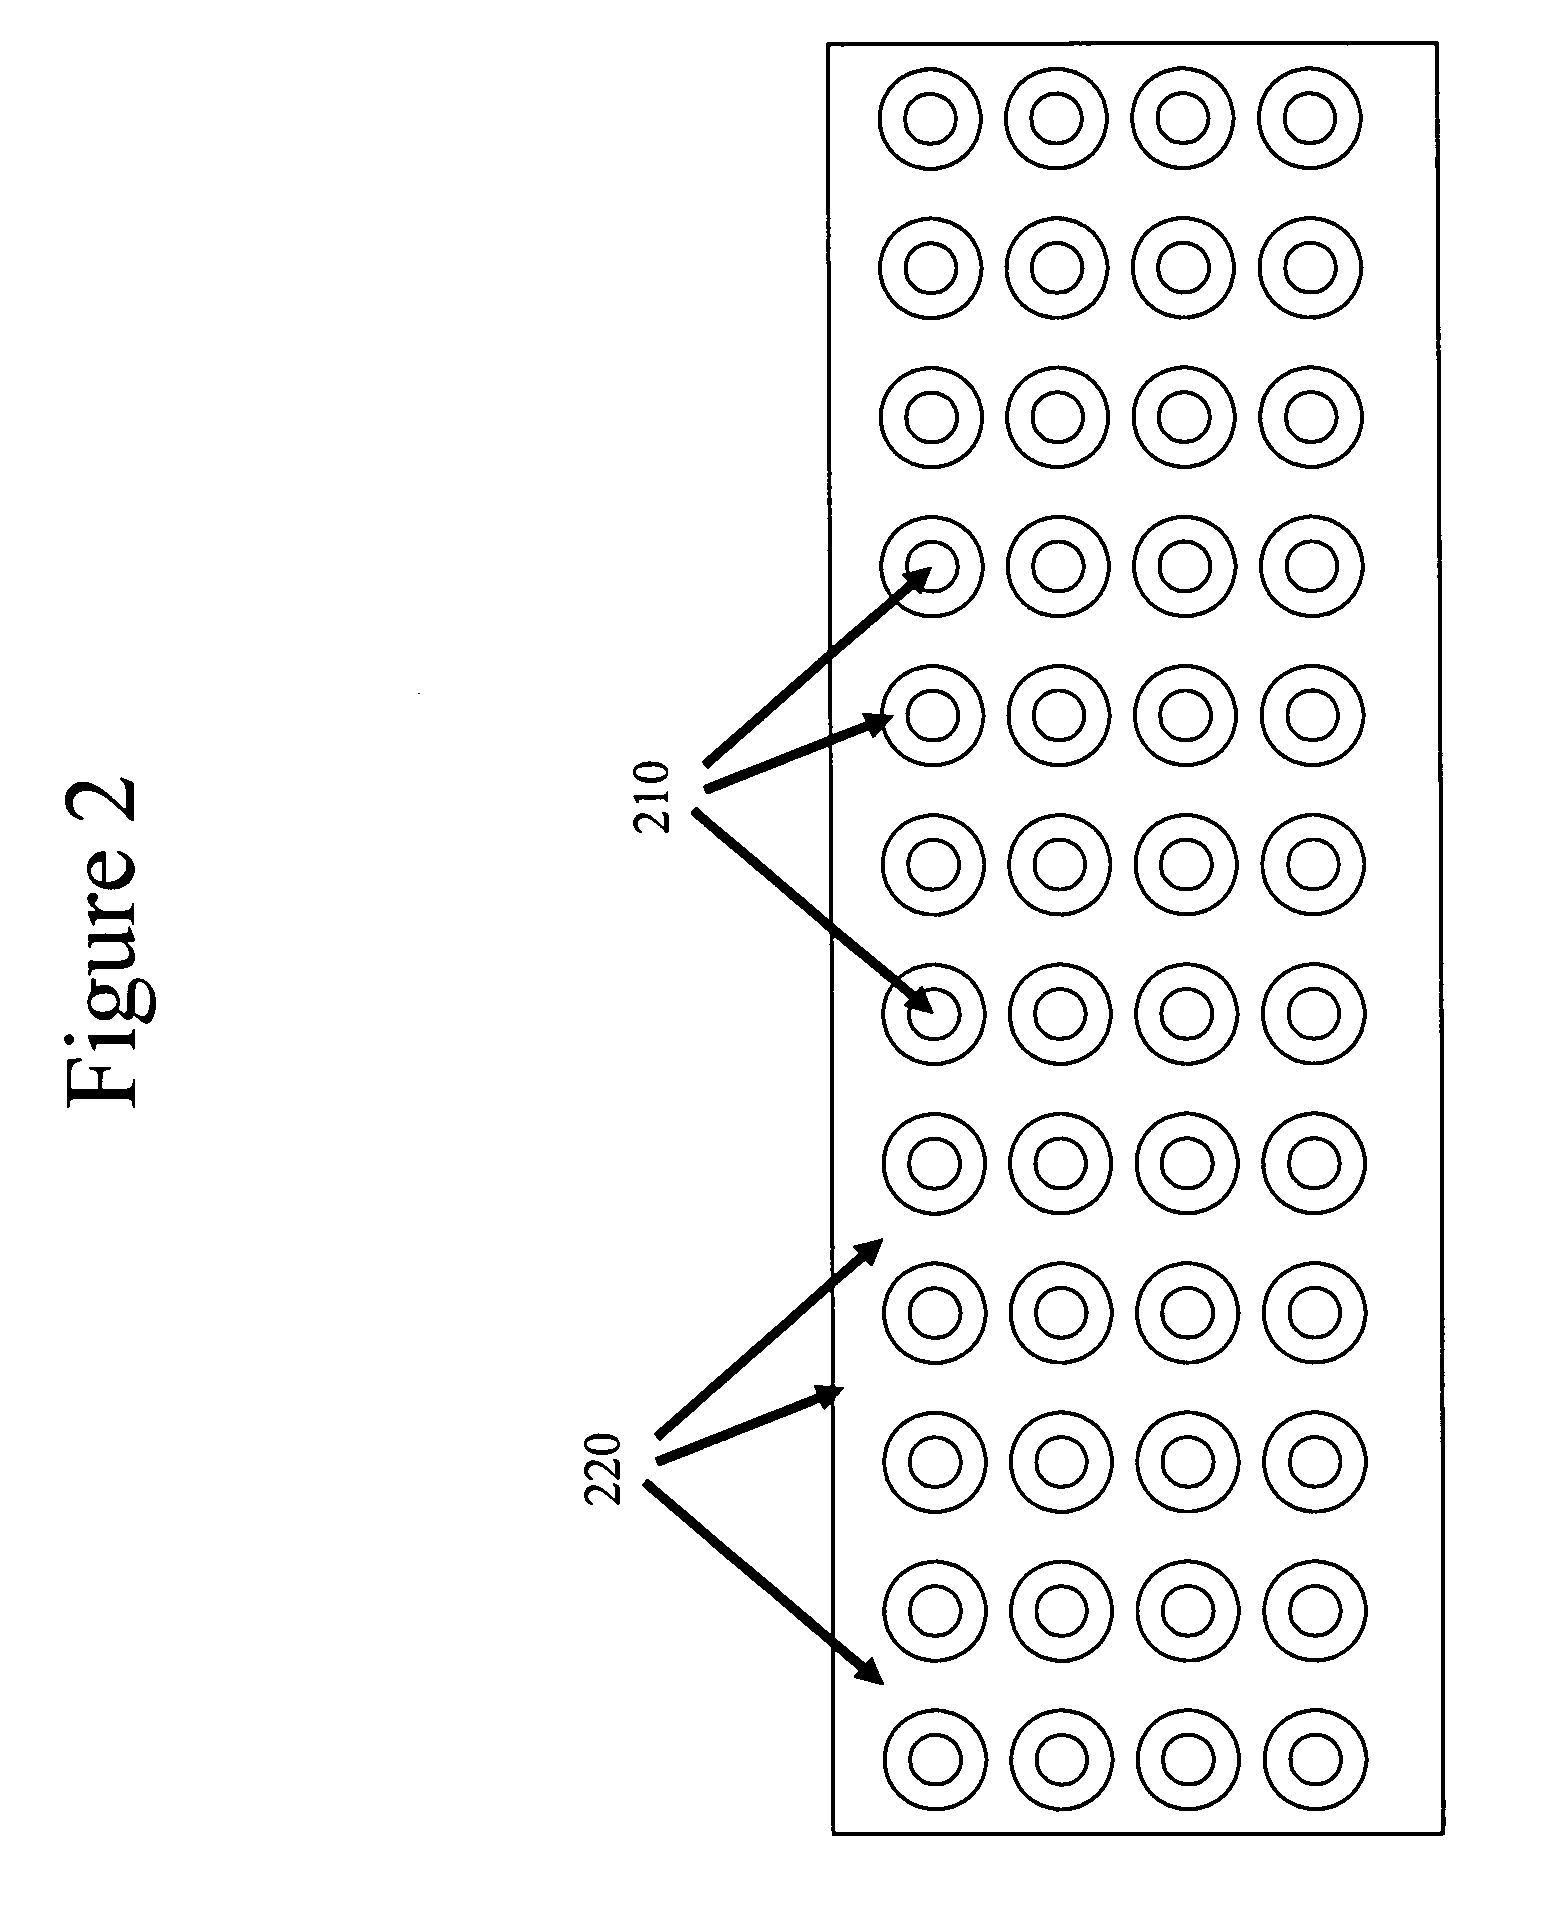 Nanostructured material comprising semiconductor nanocrystal complexes for use in solar cell and method of making a solar cell comprising nanostructured material